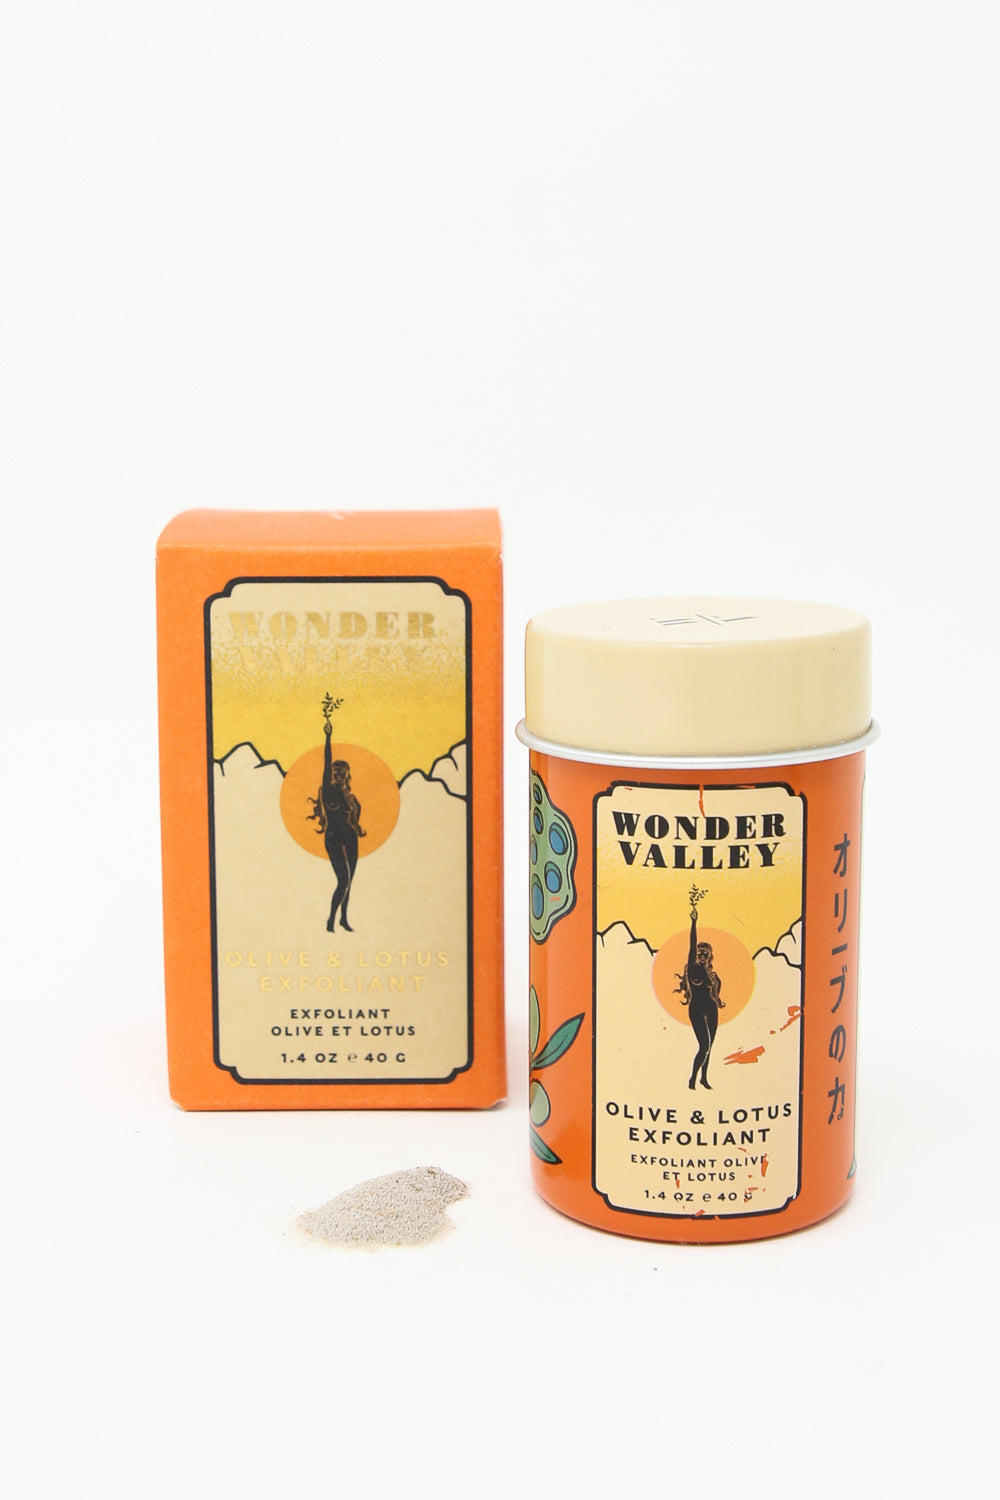 A Wonder Valley Olive & Lotus Exfoliant tin with a box next to it for facial exfoliation using botanical powders.